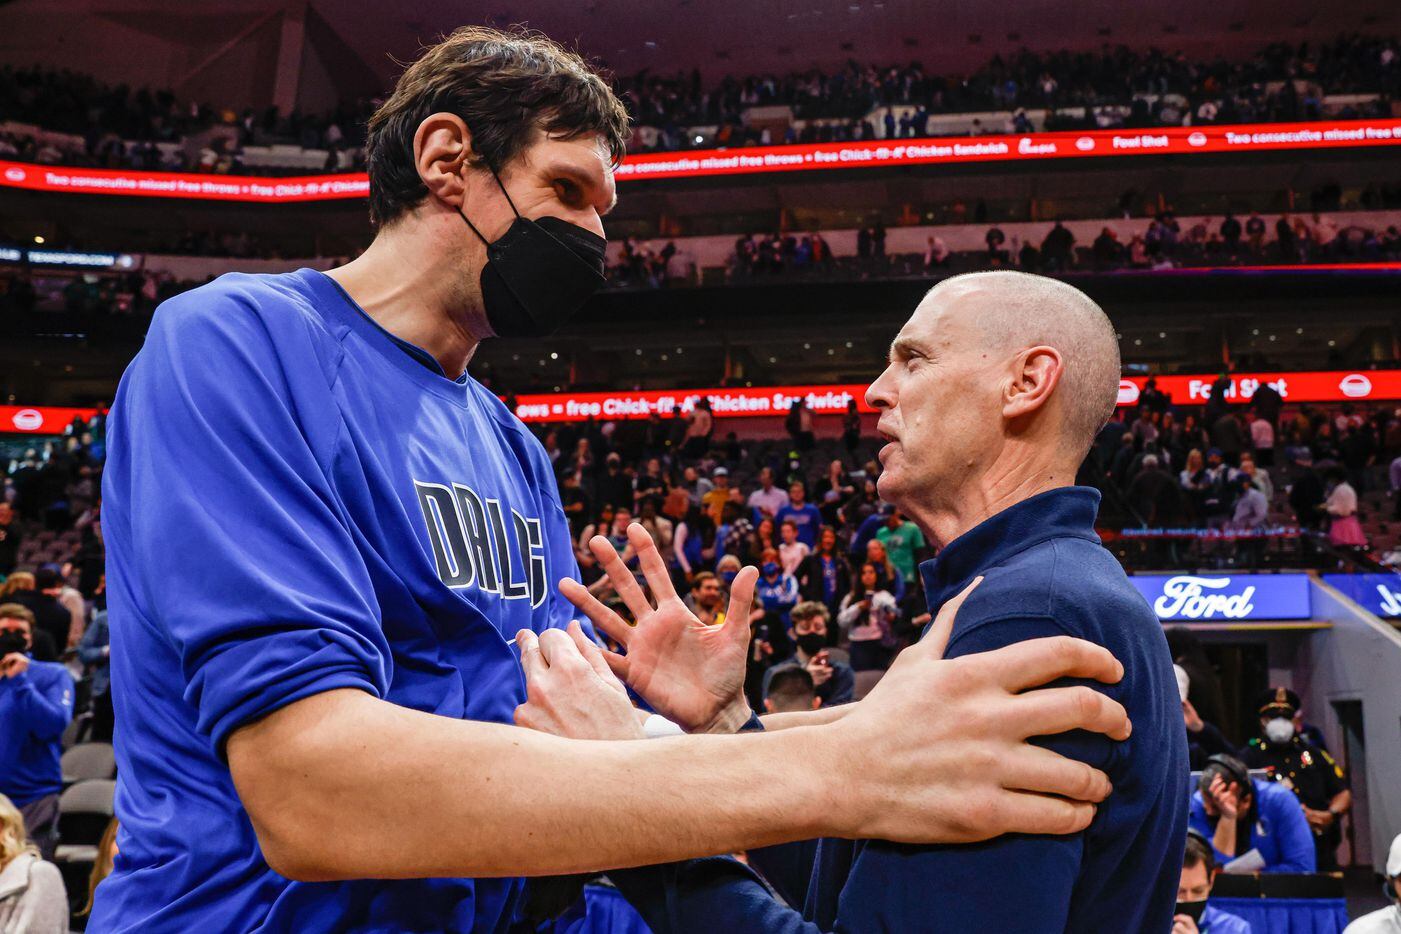 Dallas Mavericks center Boban Marjanovic (51) greets Indiana Pacers coach Rick Carlisle after the game at the American Airlines Center in Dallas on Saturday, January 29, 2022.